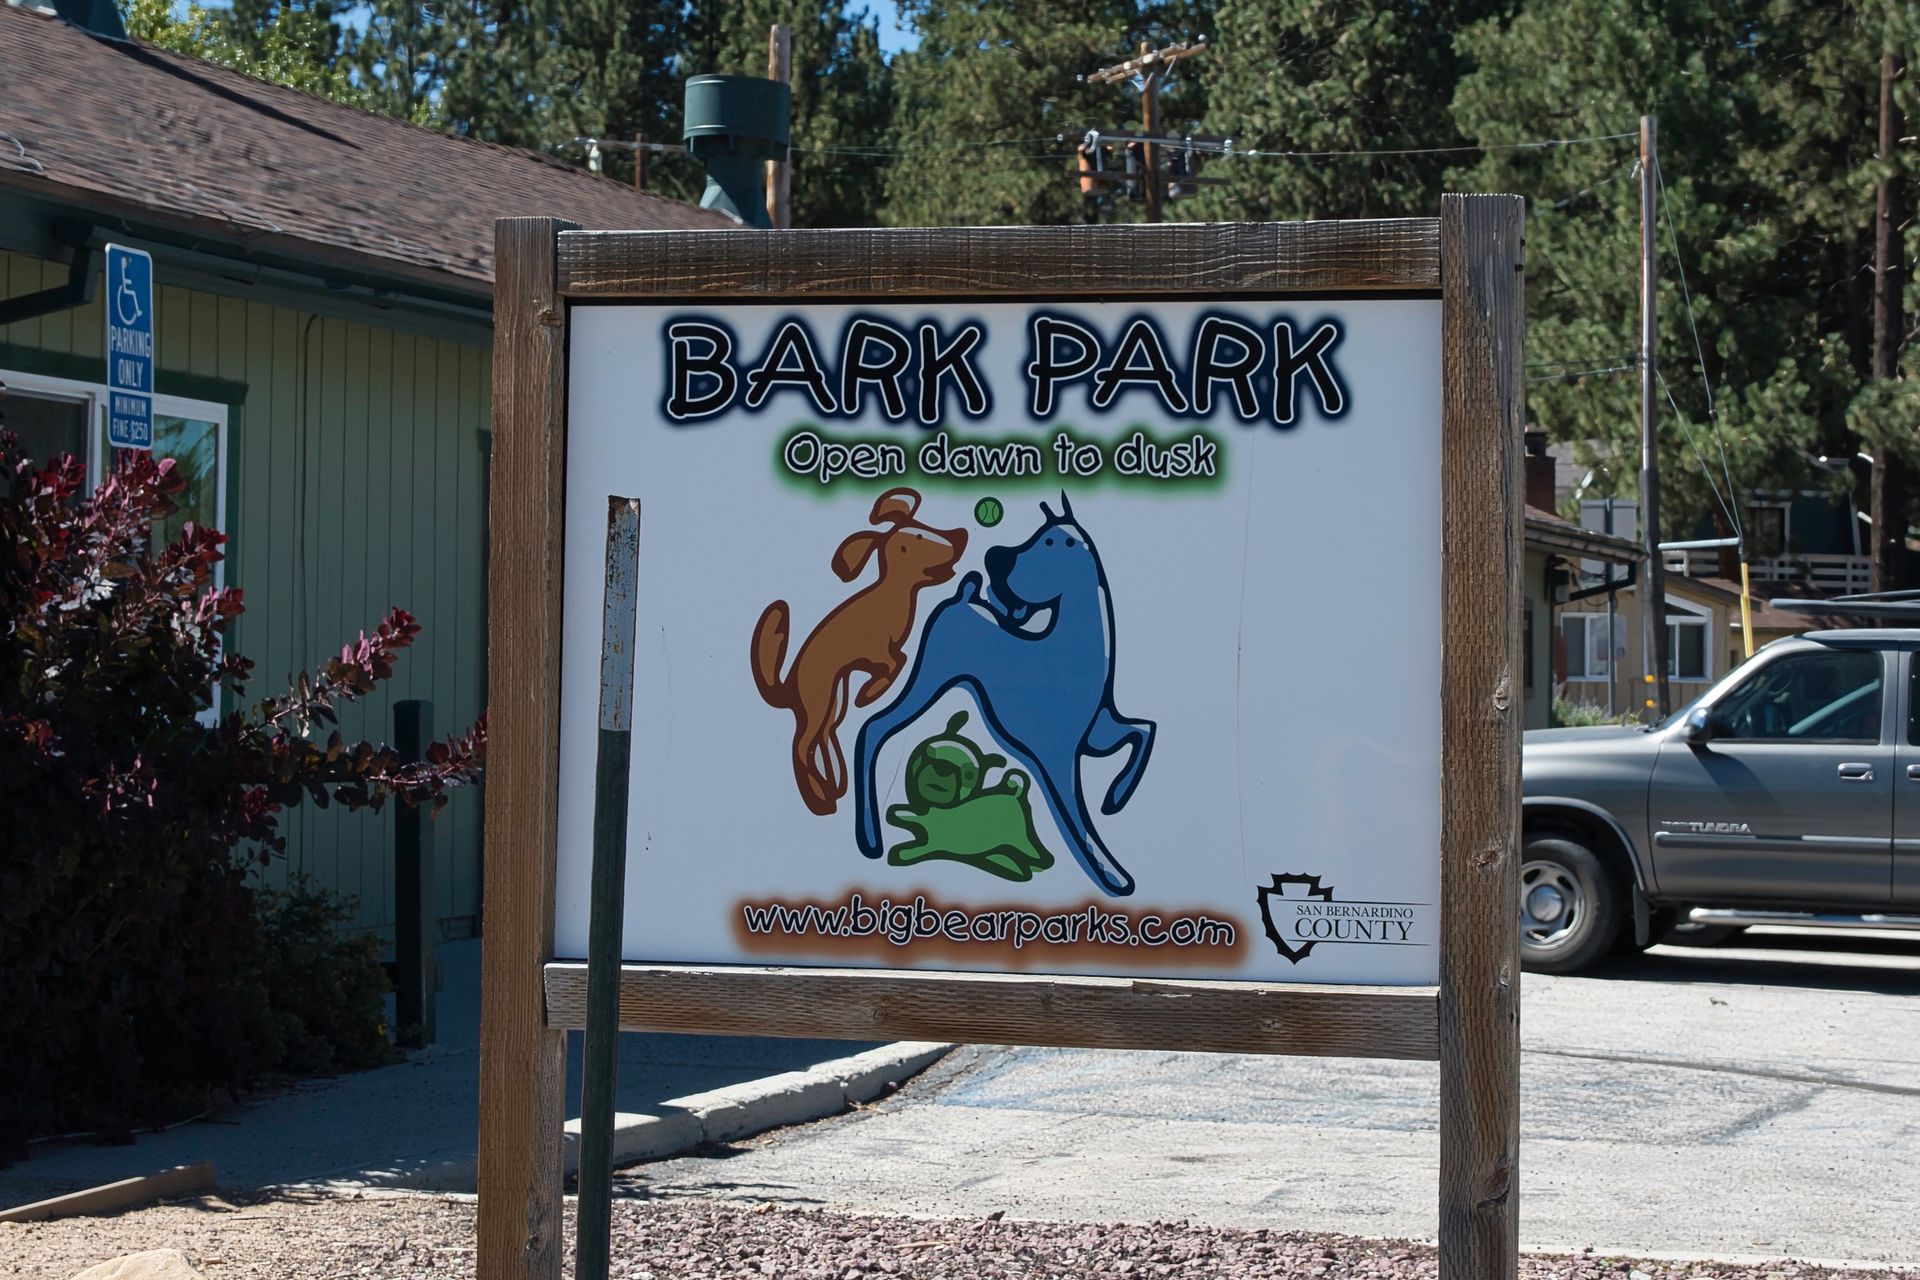 Welcome sign at Bark Park stating that it is open from dawn to dusk